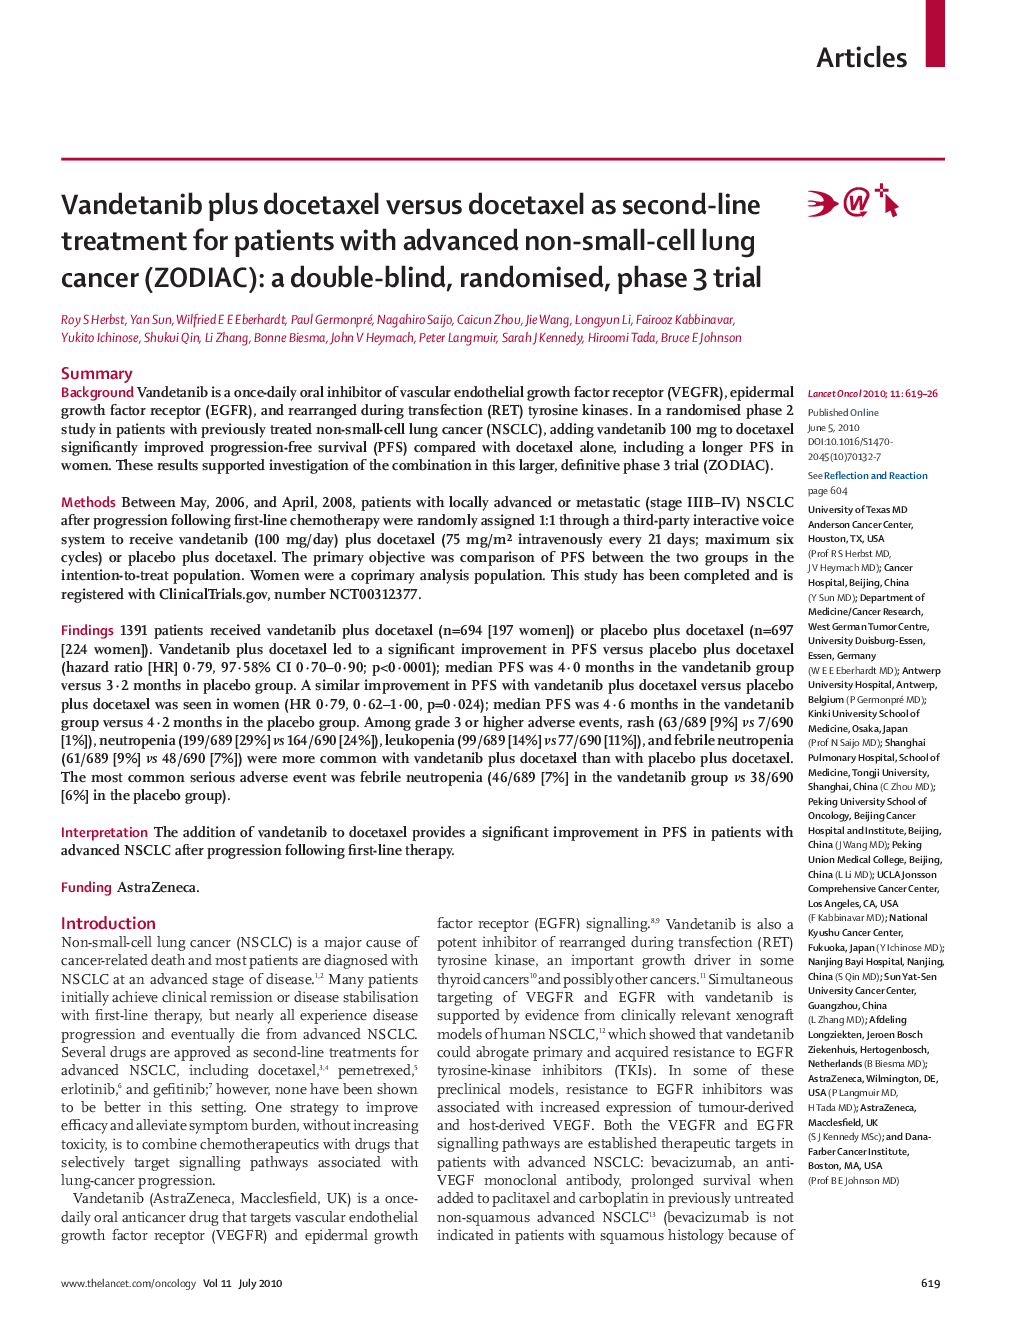 Vandetanib plus docetaxel versus docetaxel as second-line treatment for patients with advanced non-small-cell lung cancer (ZODIAC): a double-blind, randomised, phase 3 trial